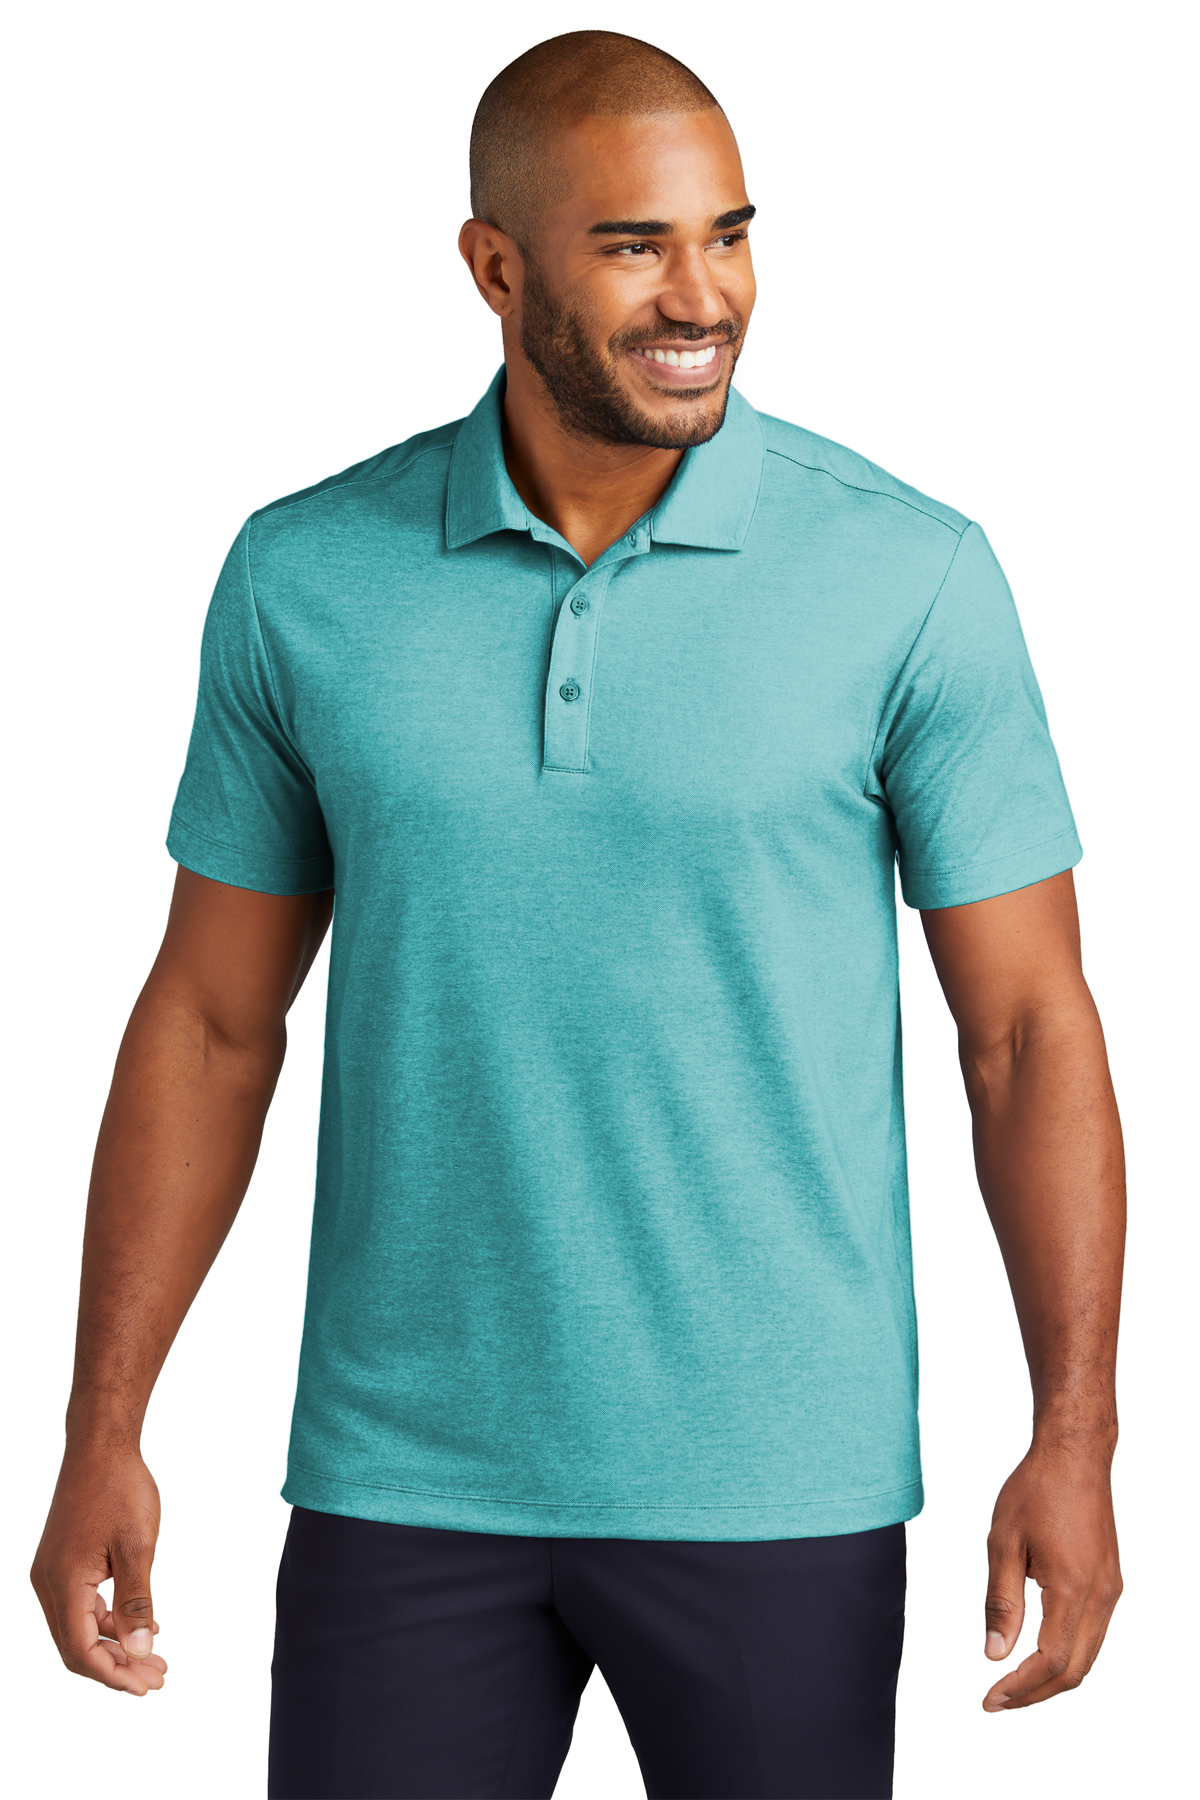 click to view Dark Teal Heather